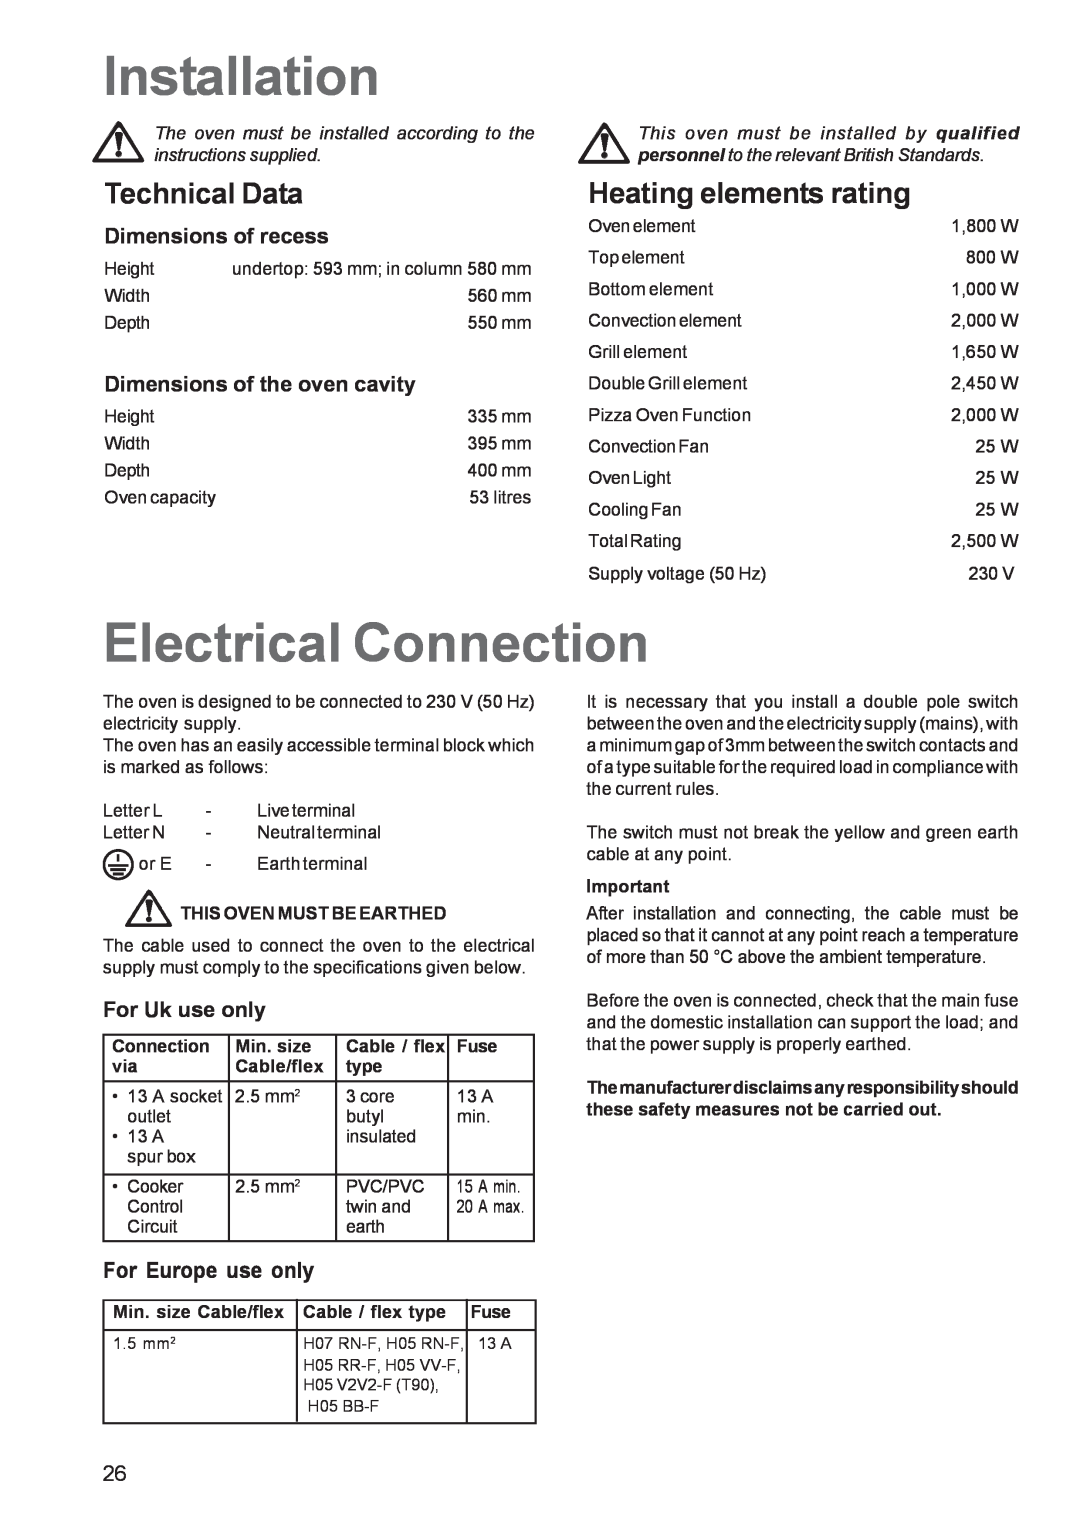 Zanussi ZBS 1063 Installation, Electrical Connection, Technical Data, Heating elements rating, Dimensions of recess, Fuse 